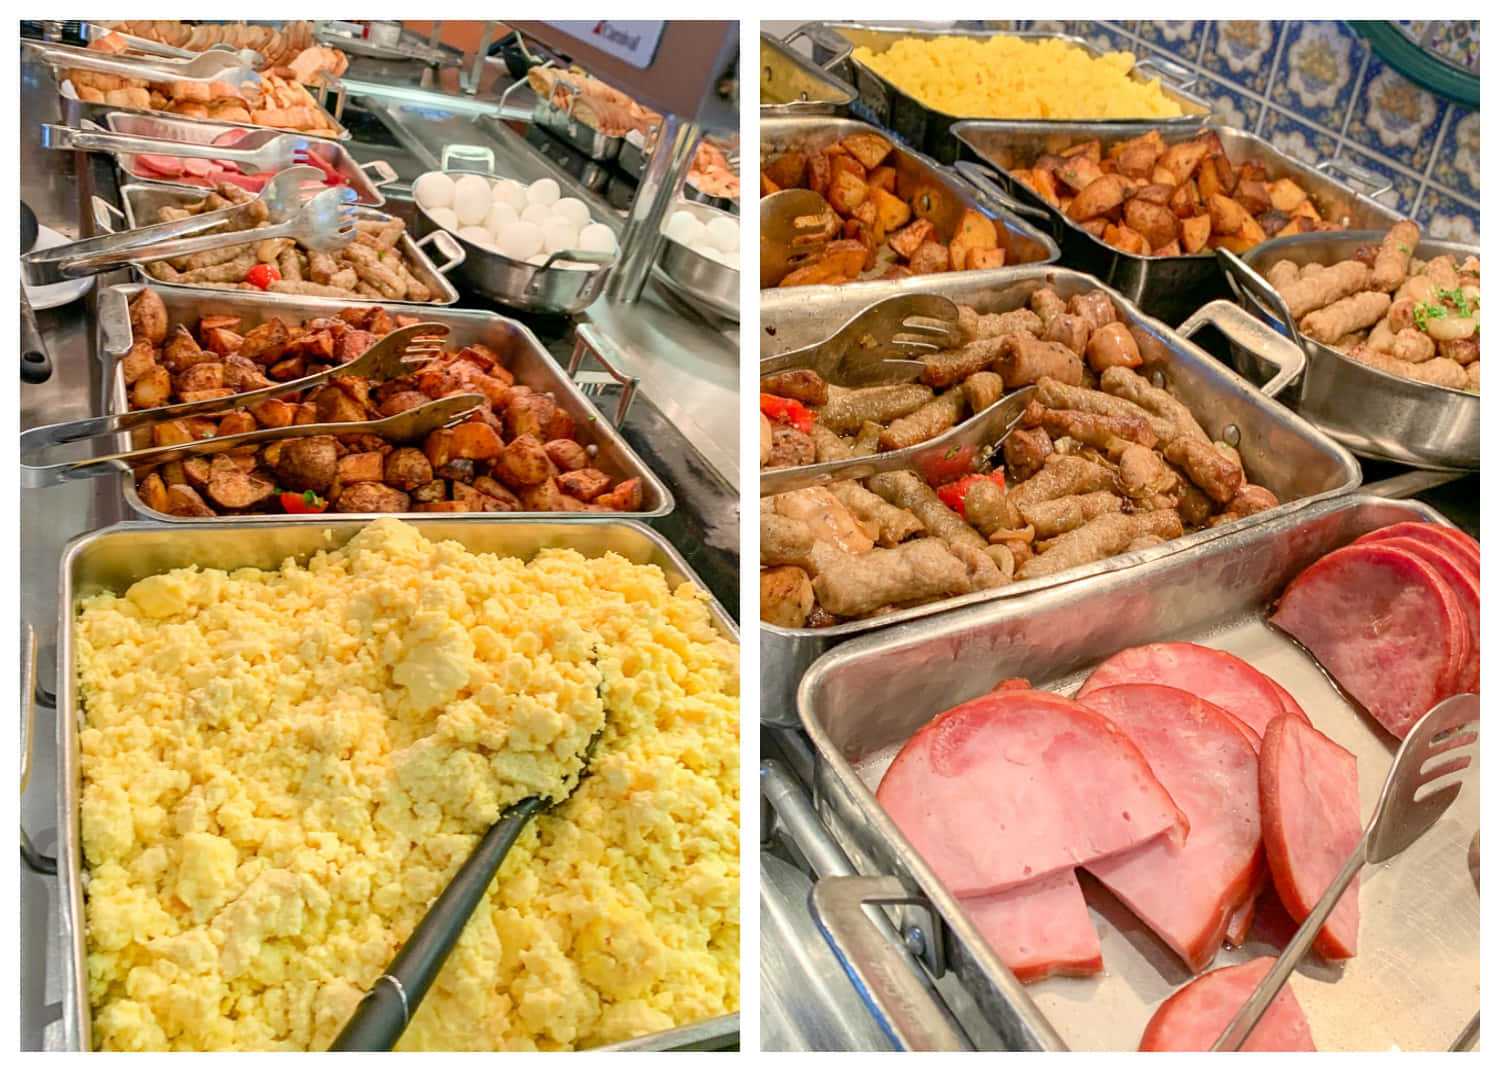 A Buffet With Ham, Eggs, And Other Foods